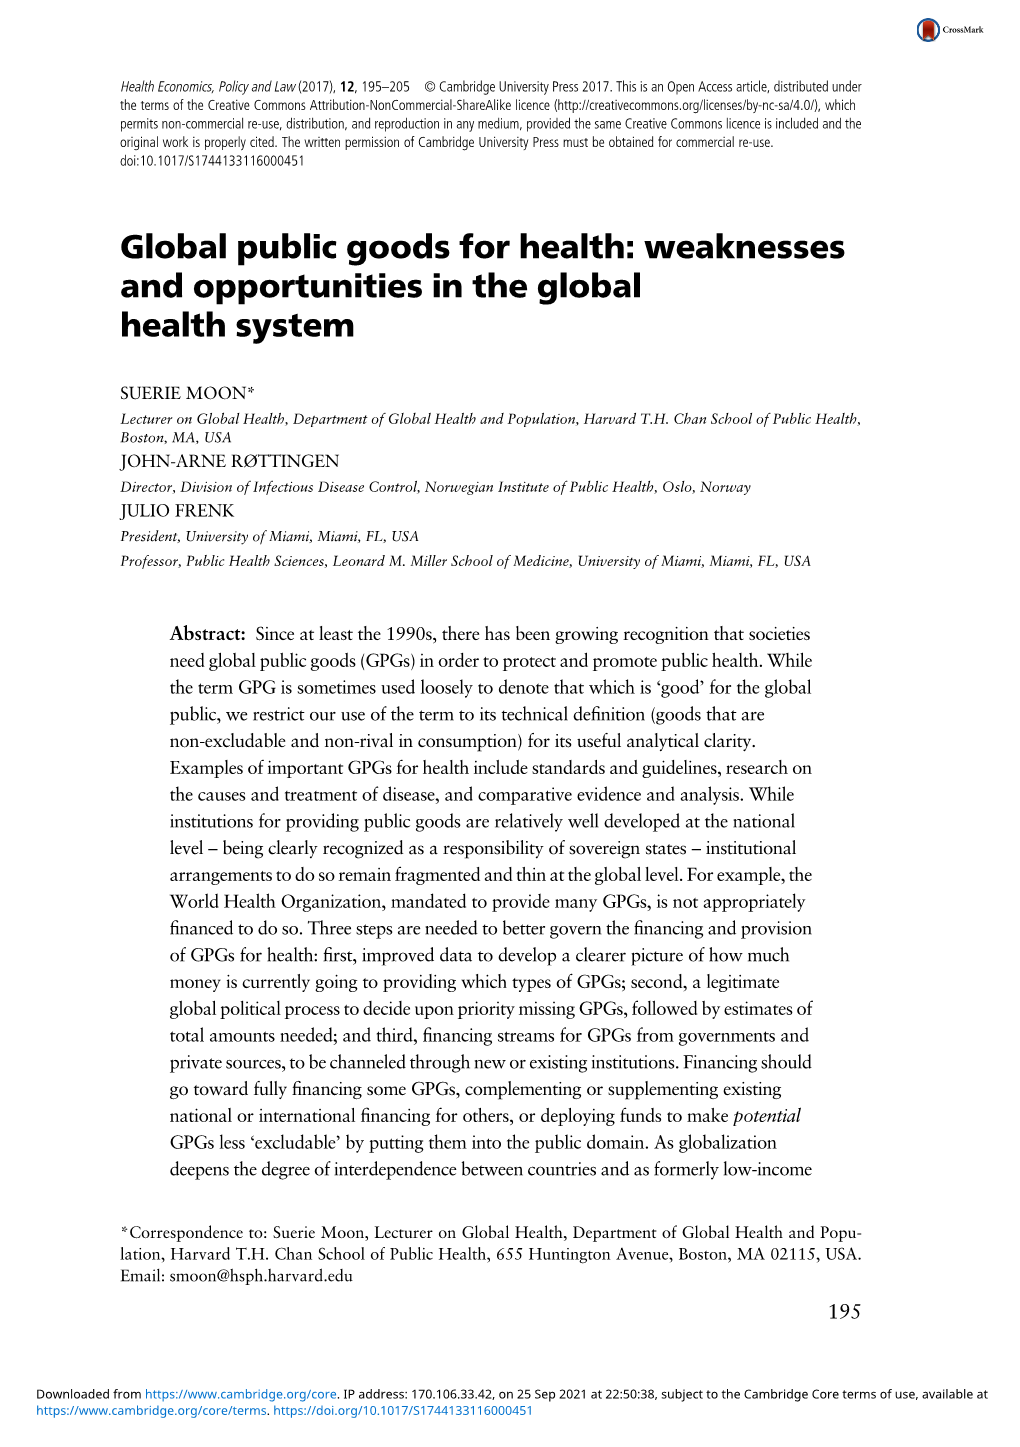 Global Public Goods for Health: Weaknesses and Opportunities in the Global Health System